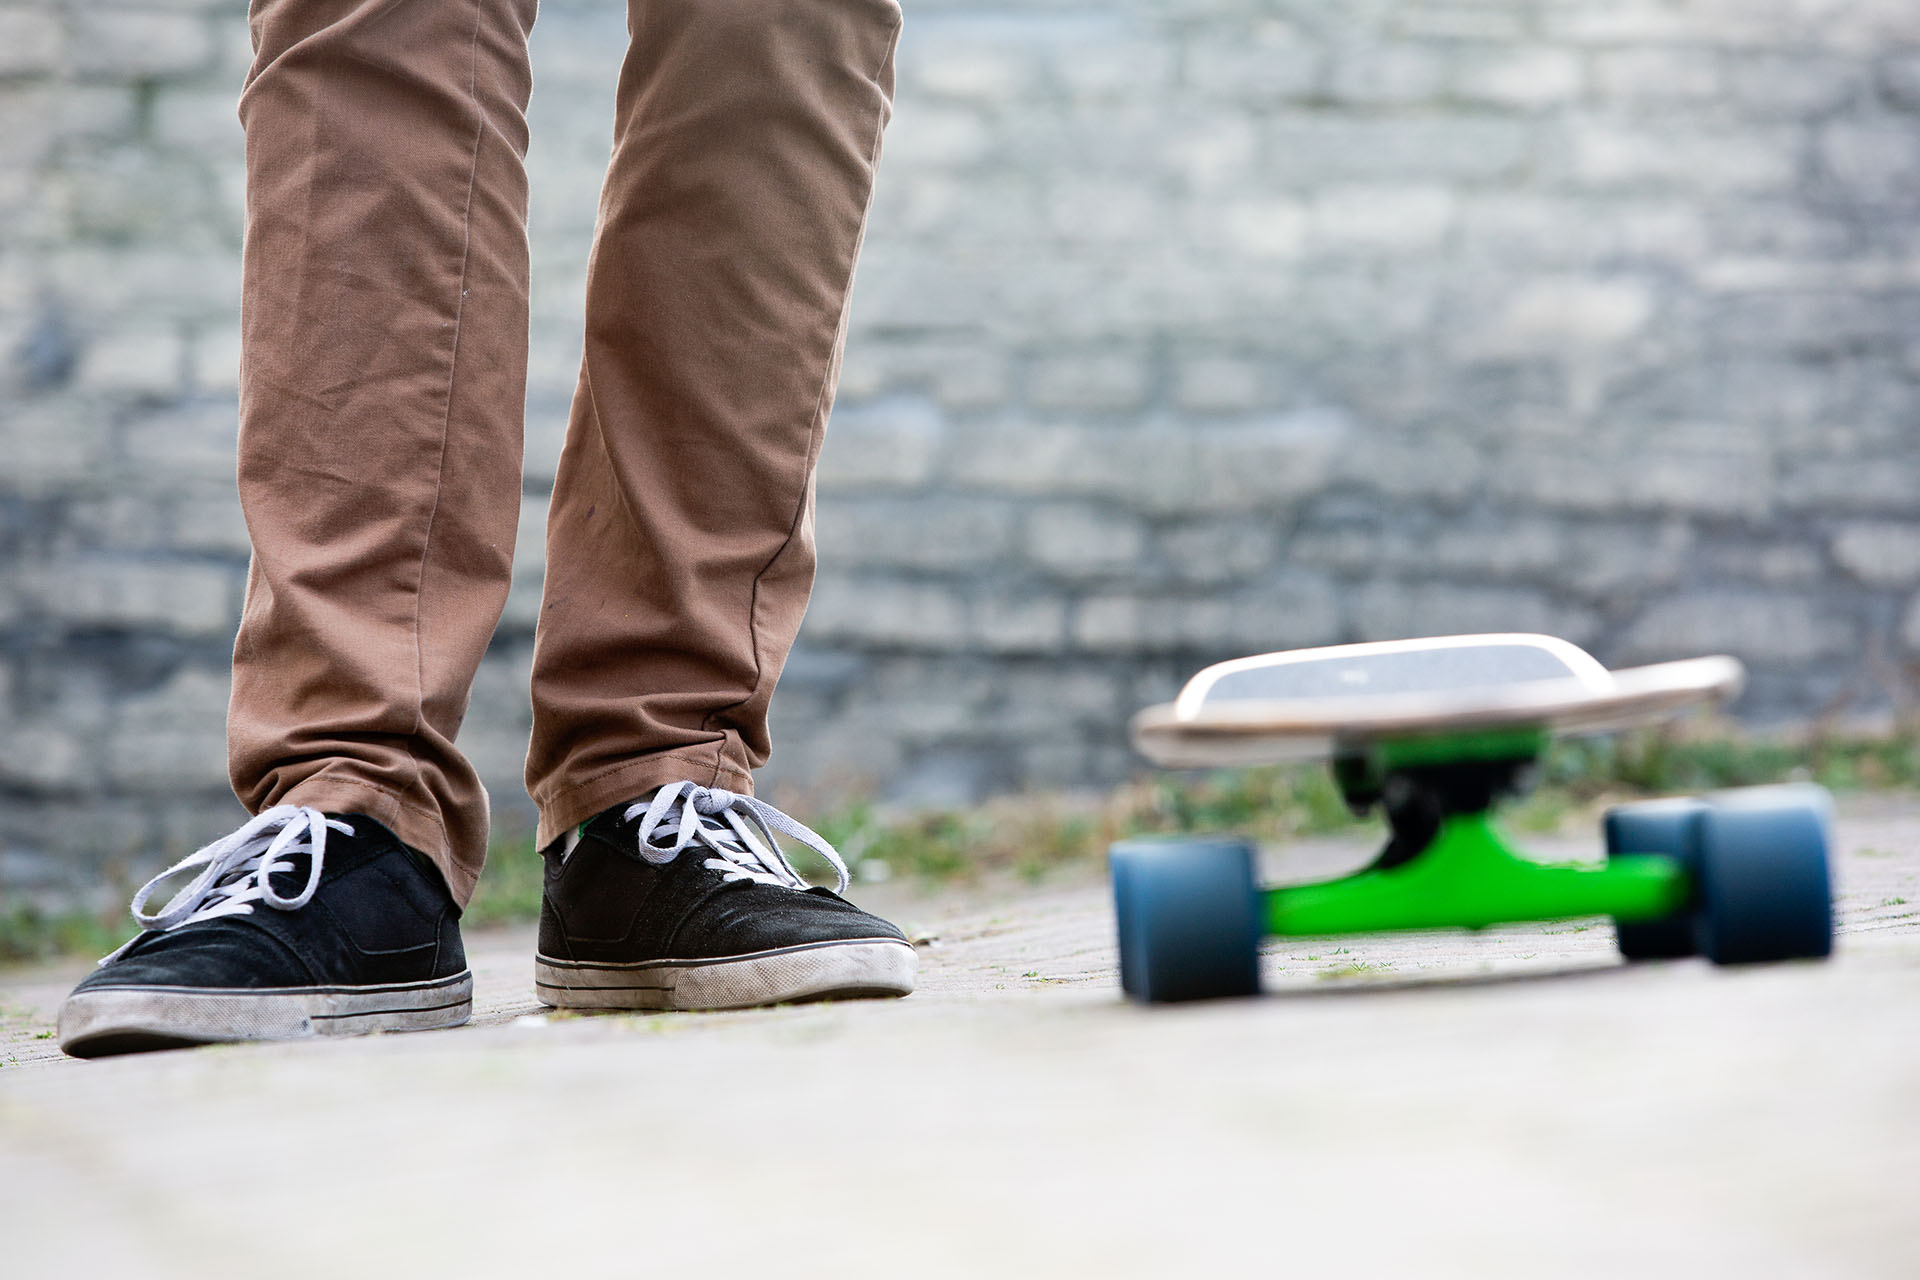 The two feet of a casually dressed man standing next to a skateboard in an urban setting, with a brick wall in the background. All earthy tones